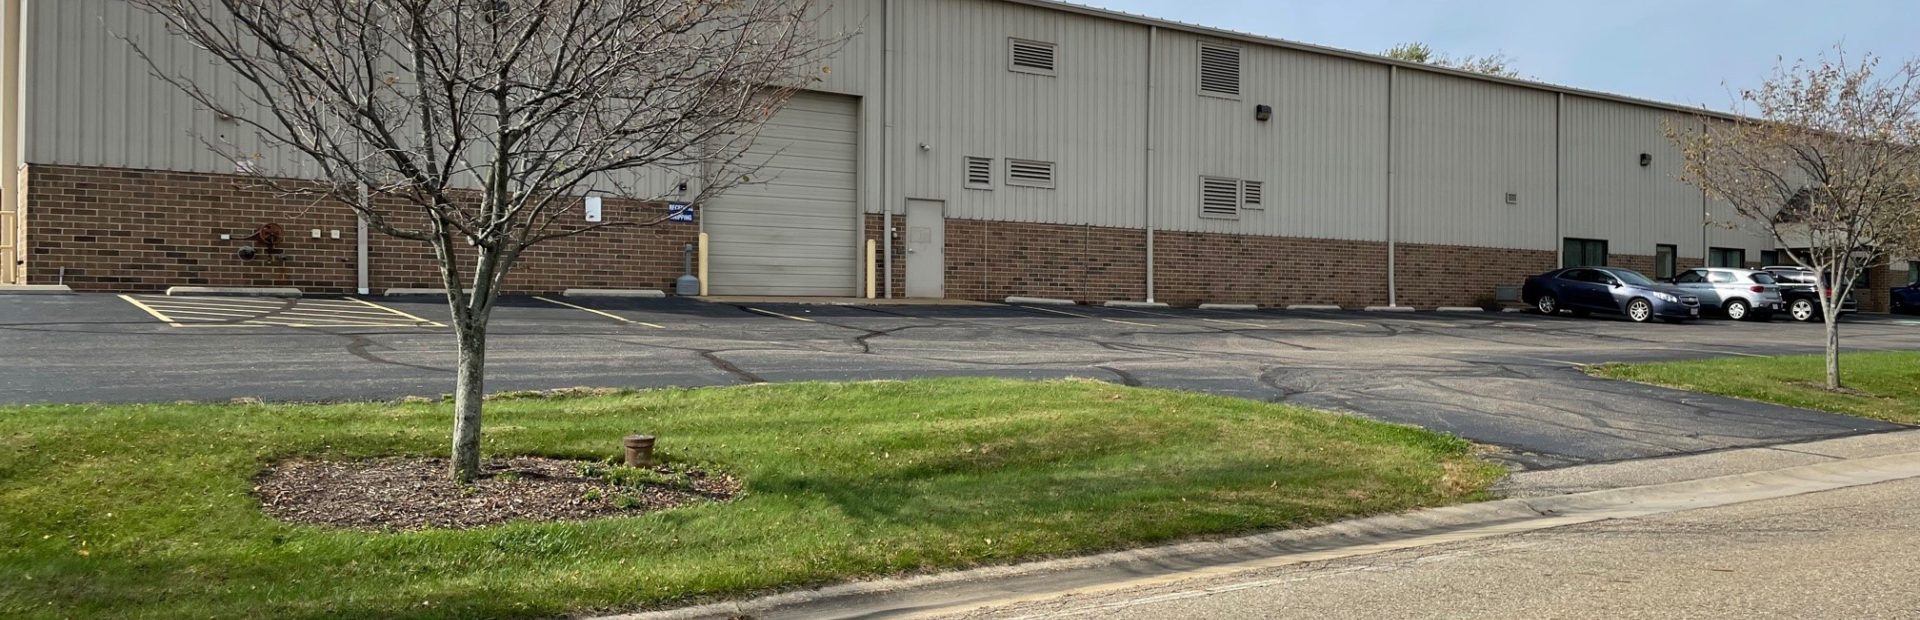 24,000 SQ.FT. HIGH BAY WAREHOUSE FOR LEASE